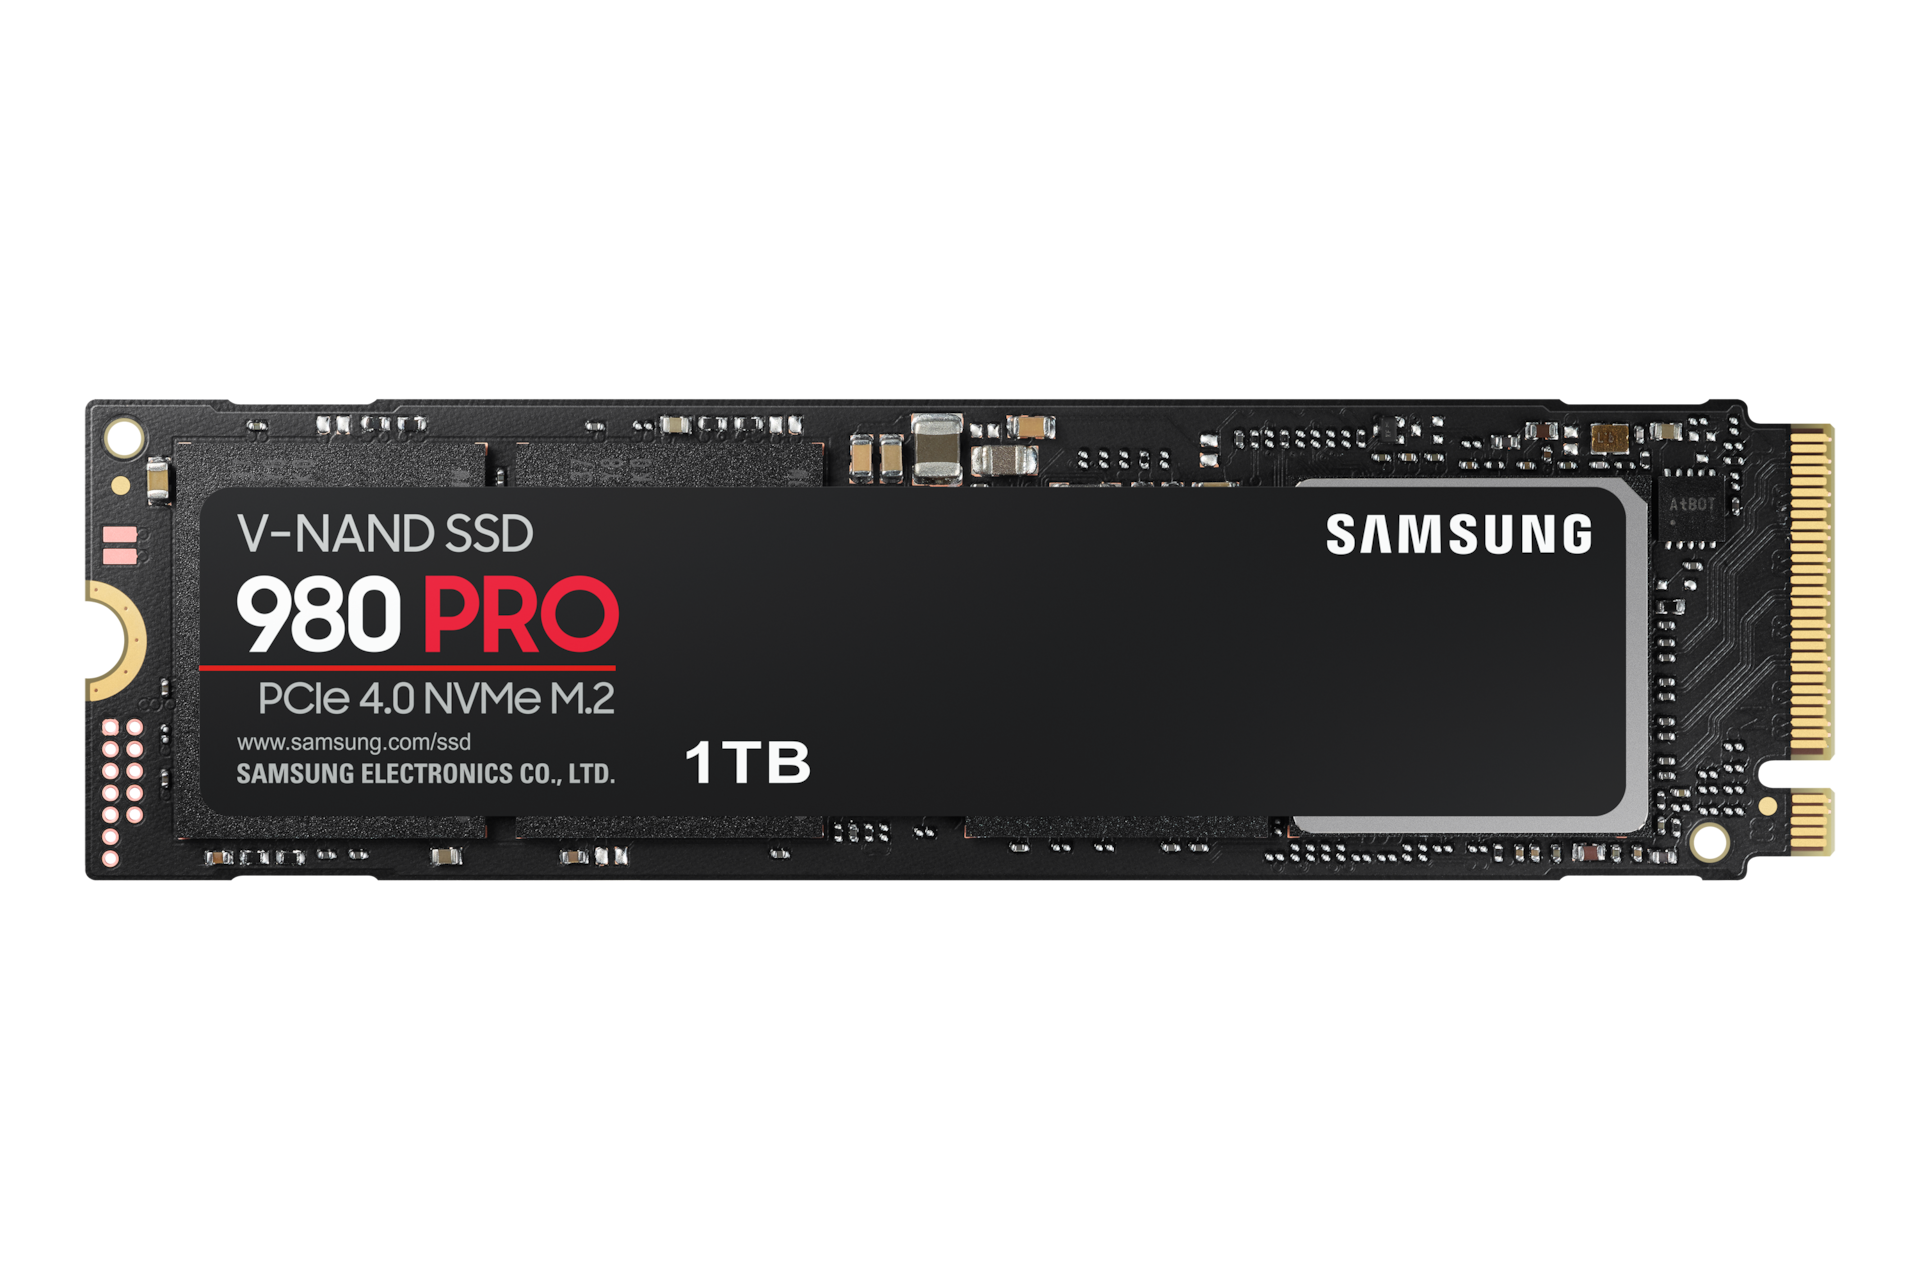 Front view of the Samsung 980 PRO PCle 4.0 NVMe M.2 SSD memory card for high performance PCs and gaming laptops.